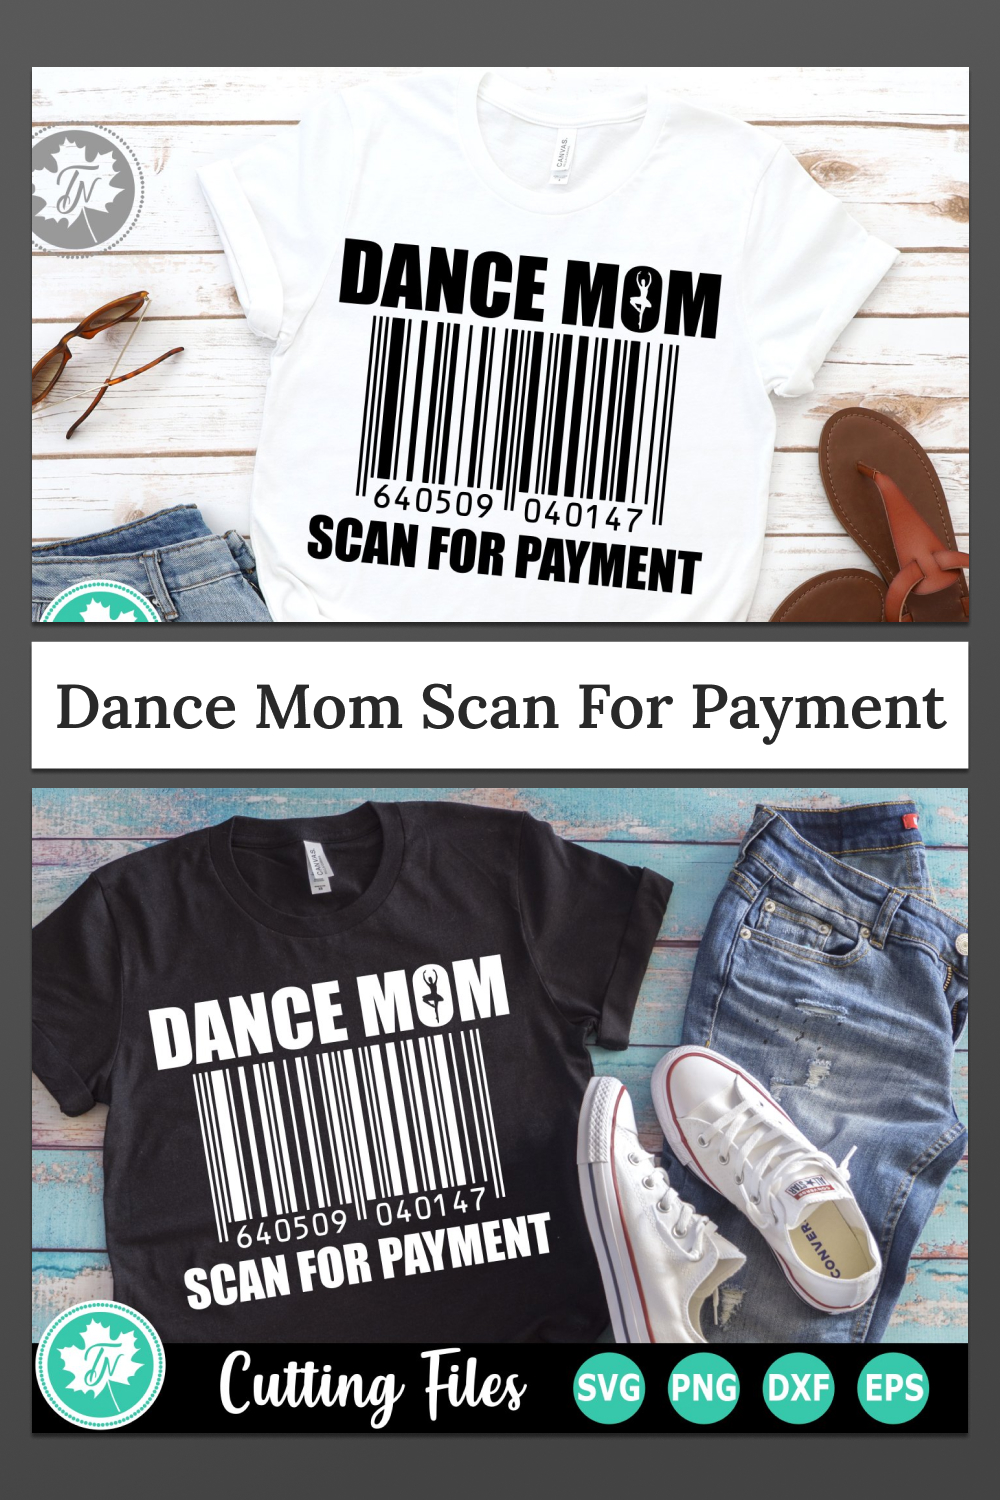 Dance mom scan for payment of pinterest.